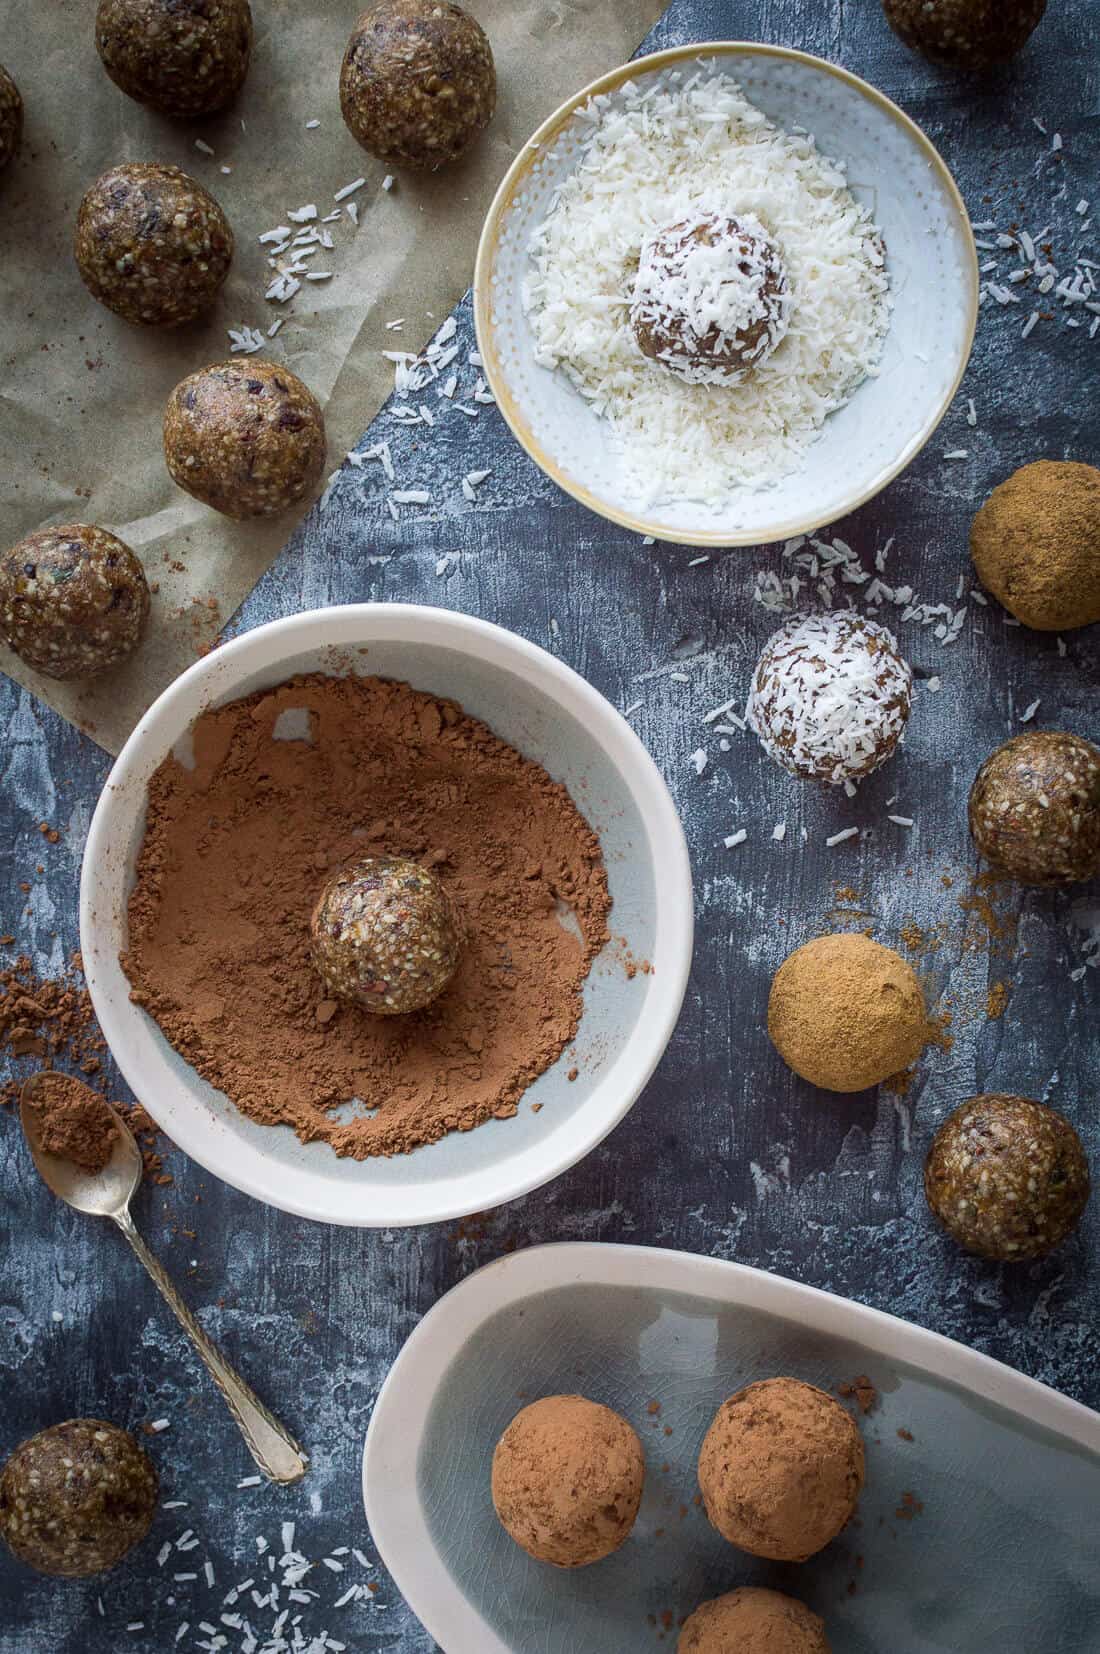 Energy balls - the ultimate high protein, energy boosting healthy snack. These easy to make vegan energy bites are loaded with seeds, nut butter and dried fruit for a convenient snack that is good for you too. #vegan #energybites #snack #healthy